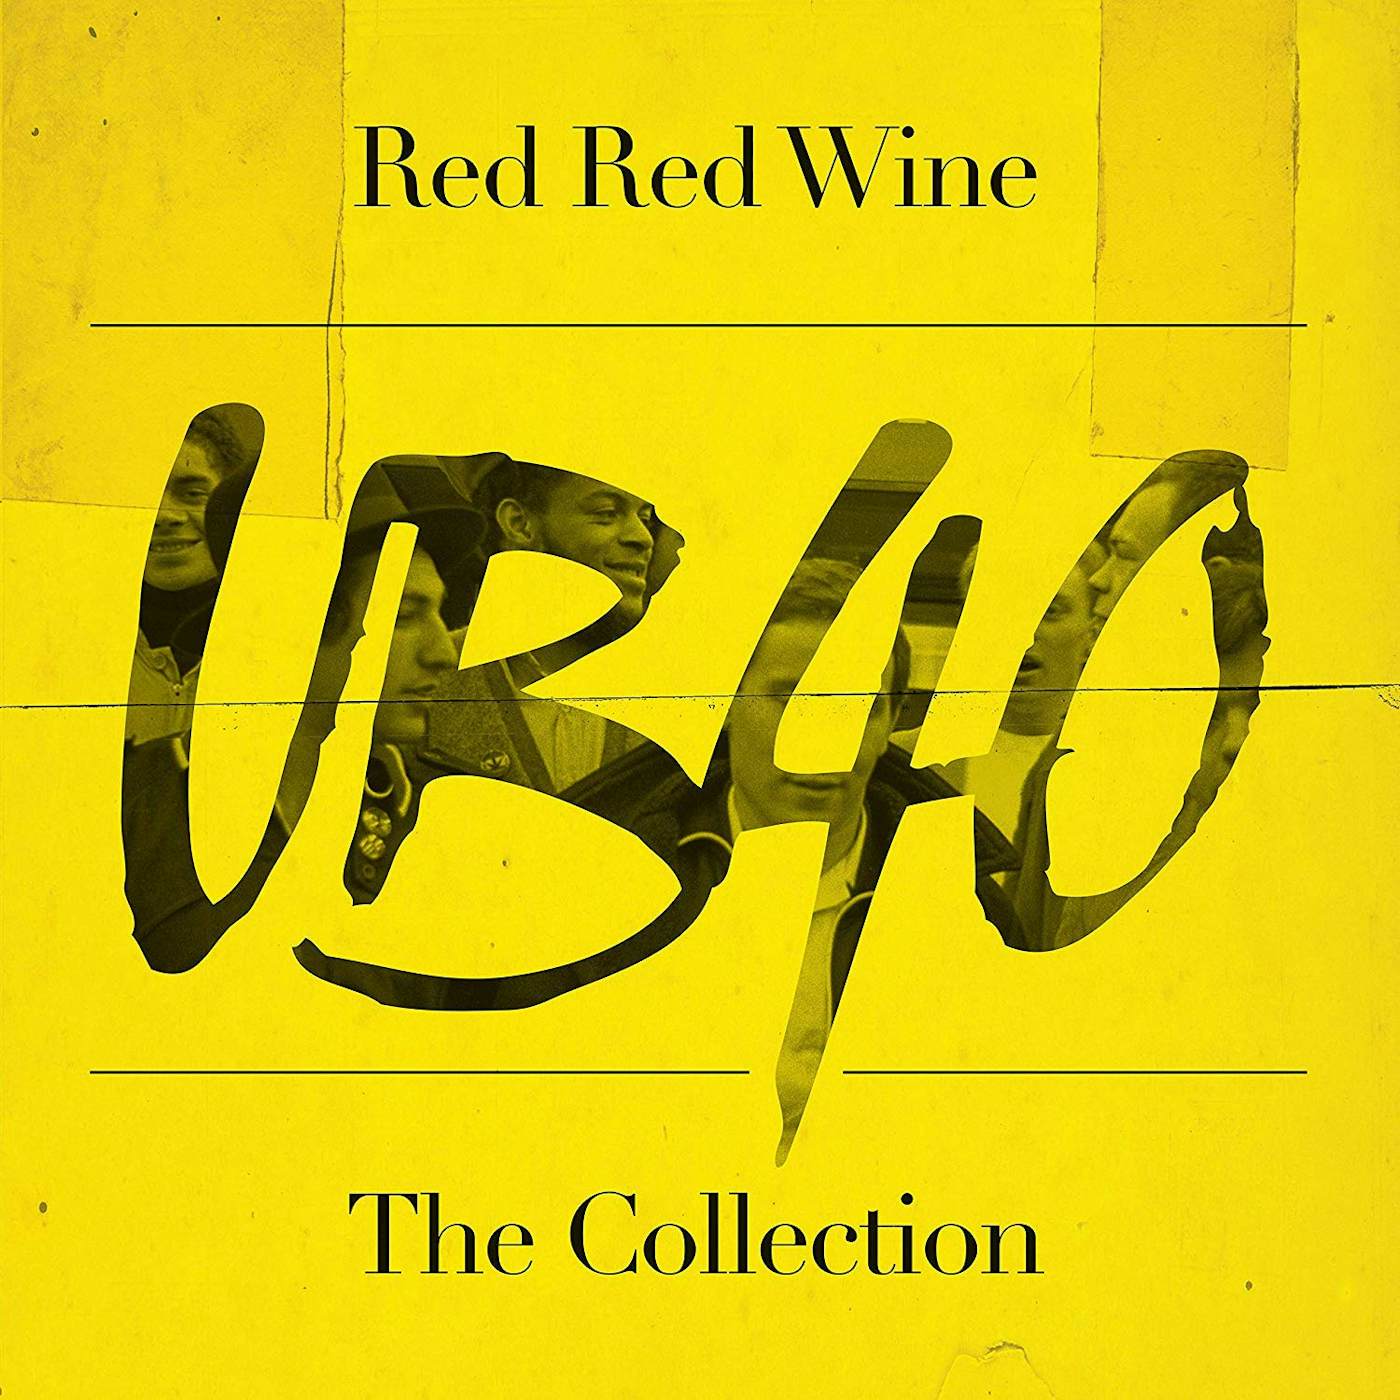 UB40 RED RED WINE: THE COLLECTION Vinyl Record